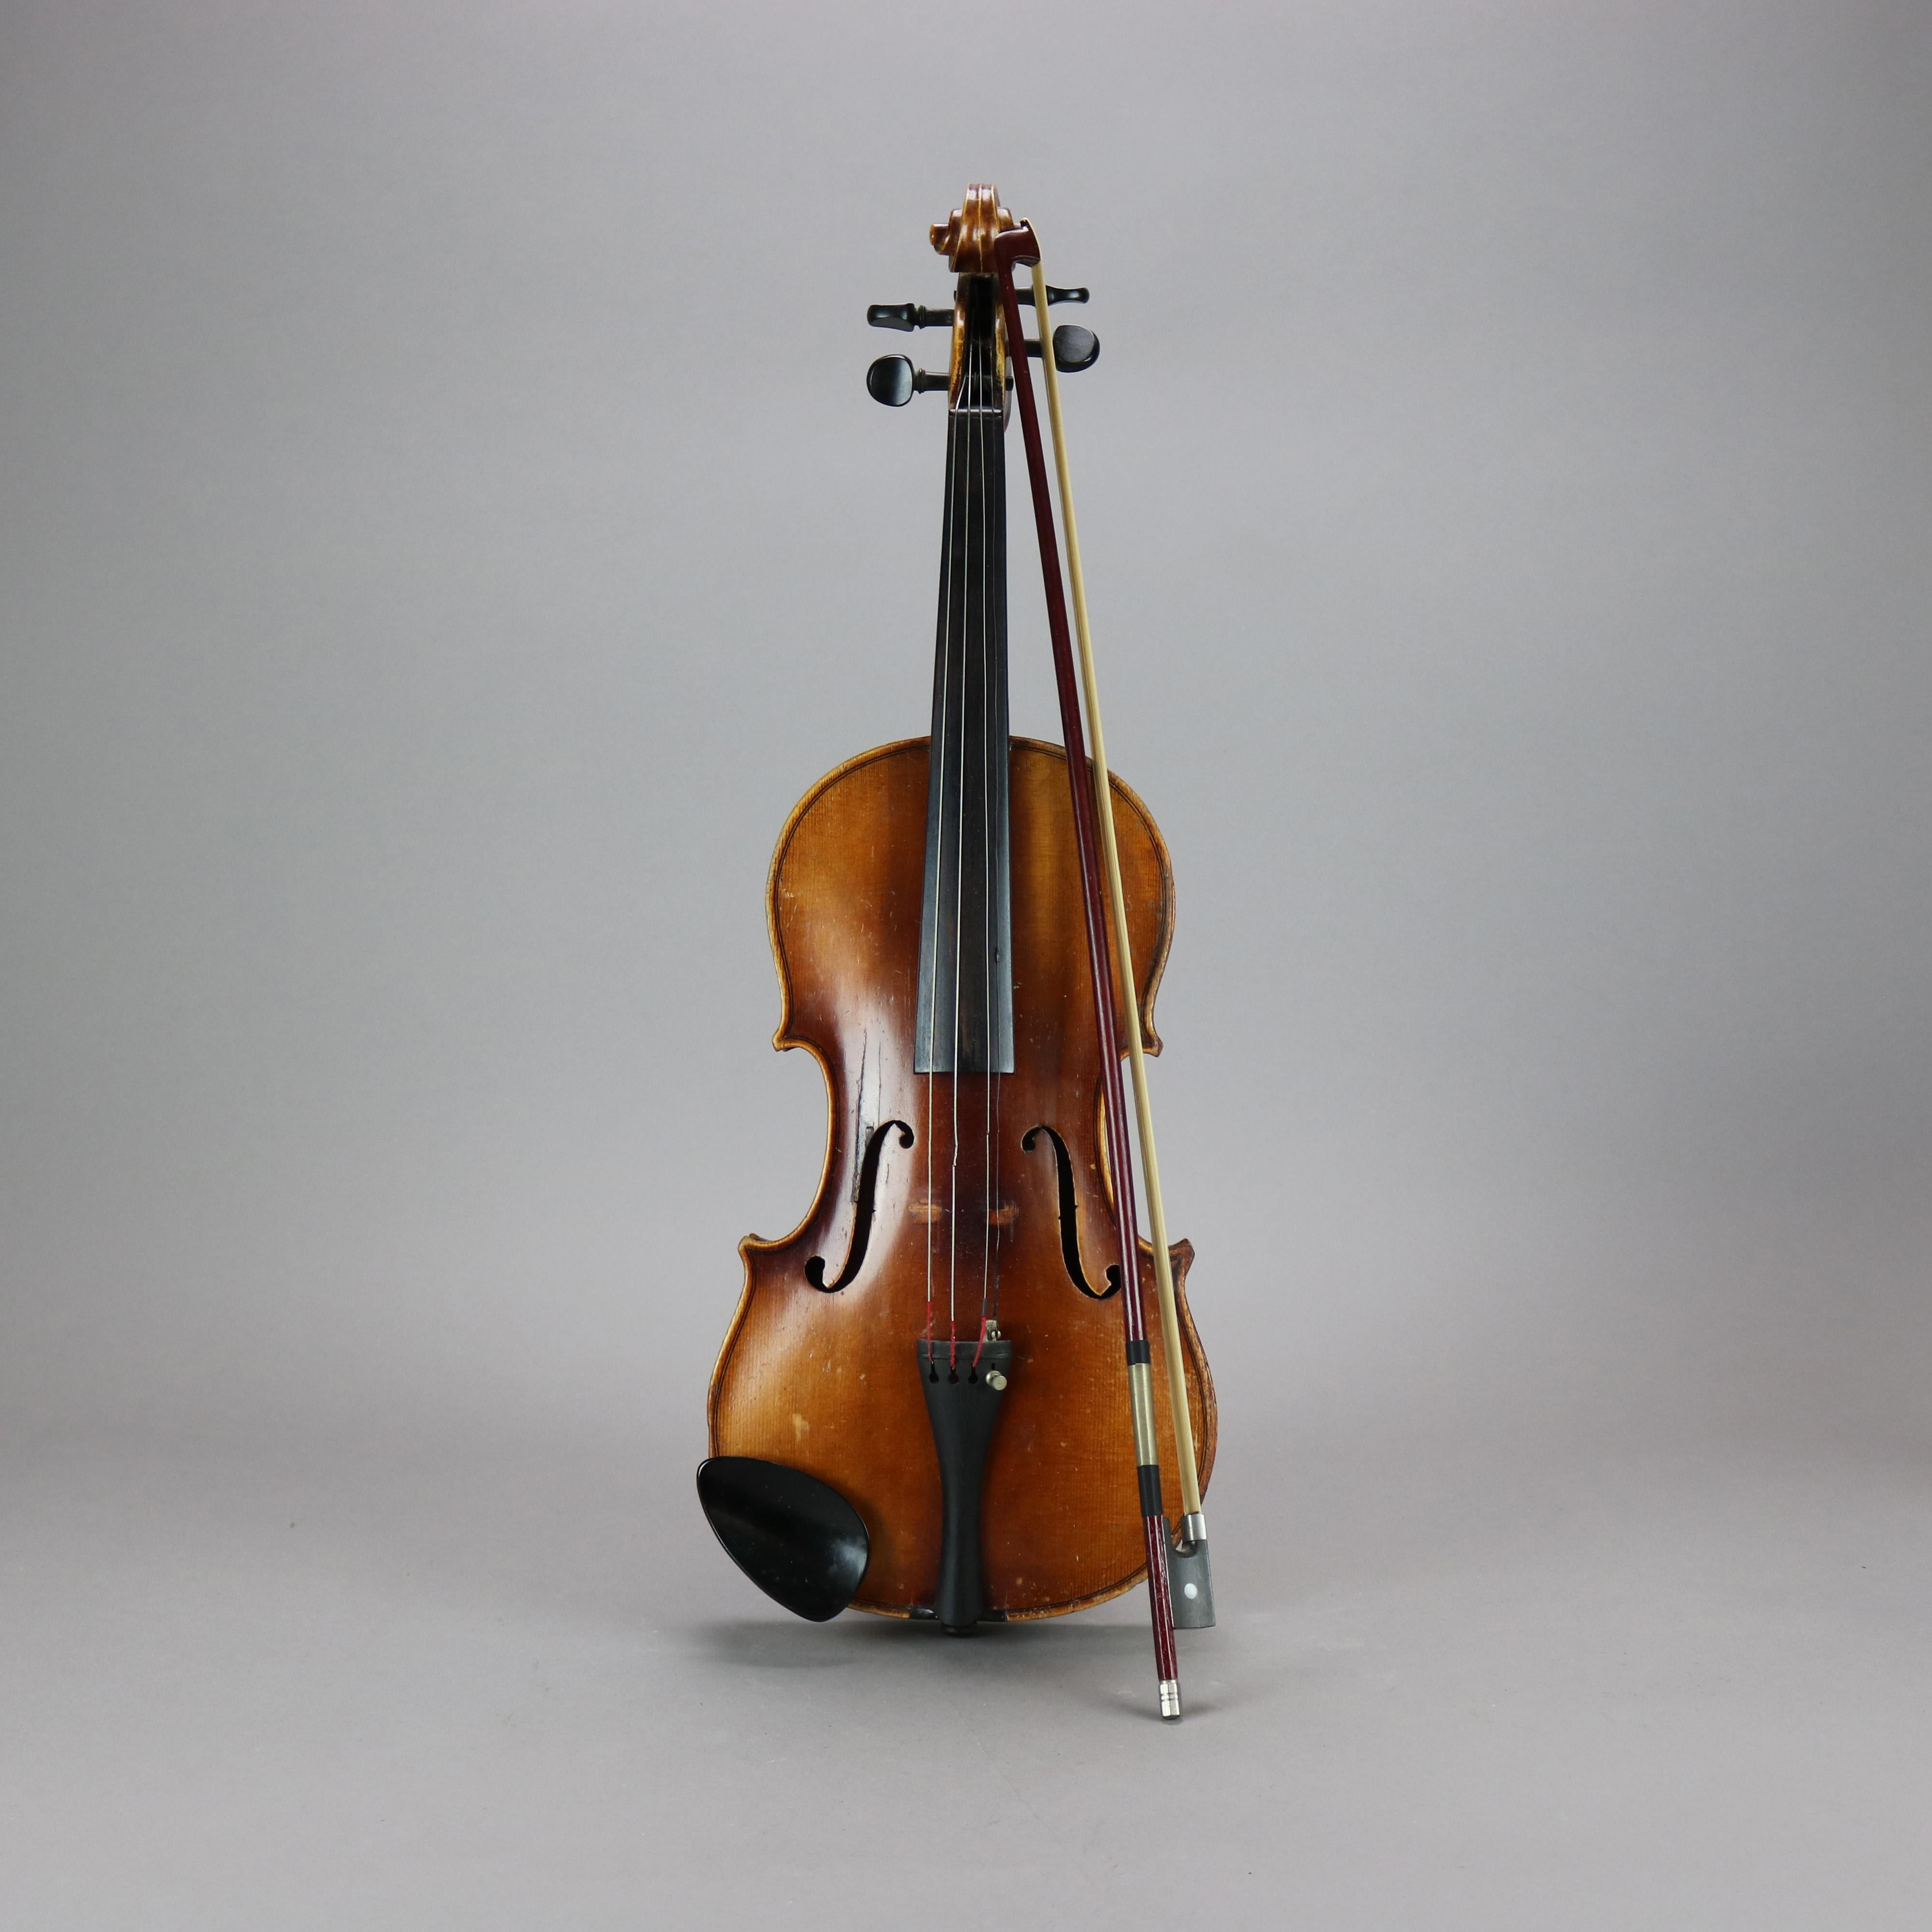 An antique 4/4 full size violin by Carl Meifel, copy of Stradivarius, signed interior, with bow, 20th century

Measures - 3'' H x 8.5'' W x 23'' L.